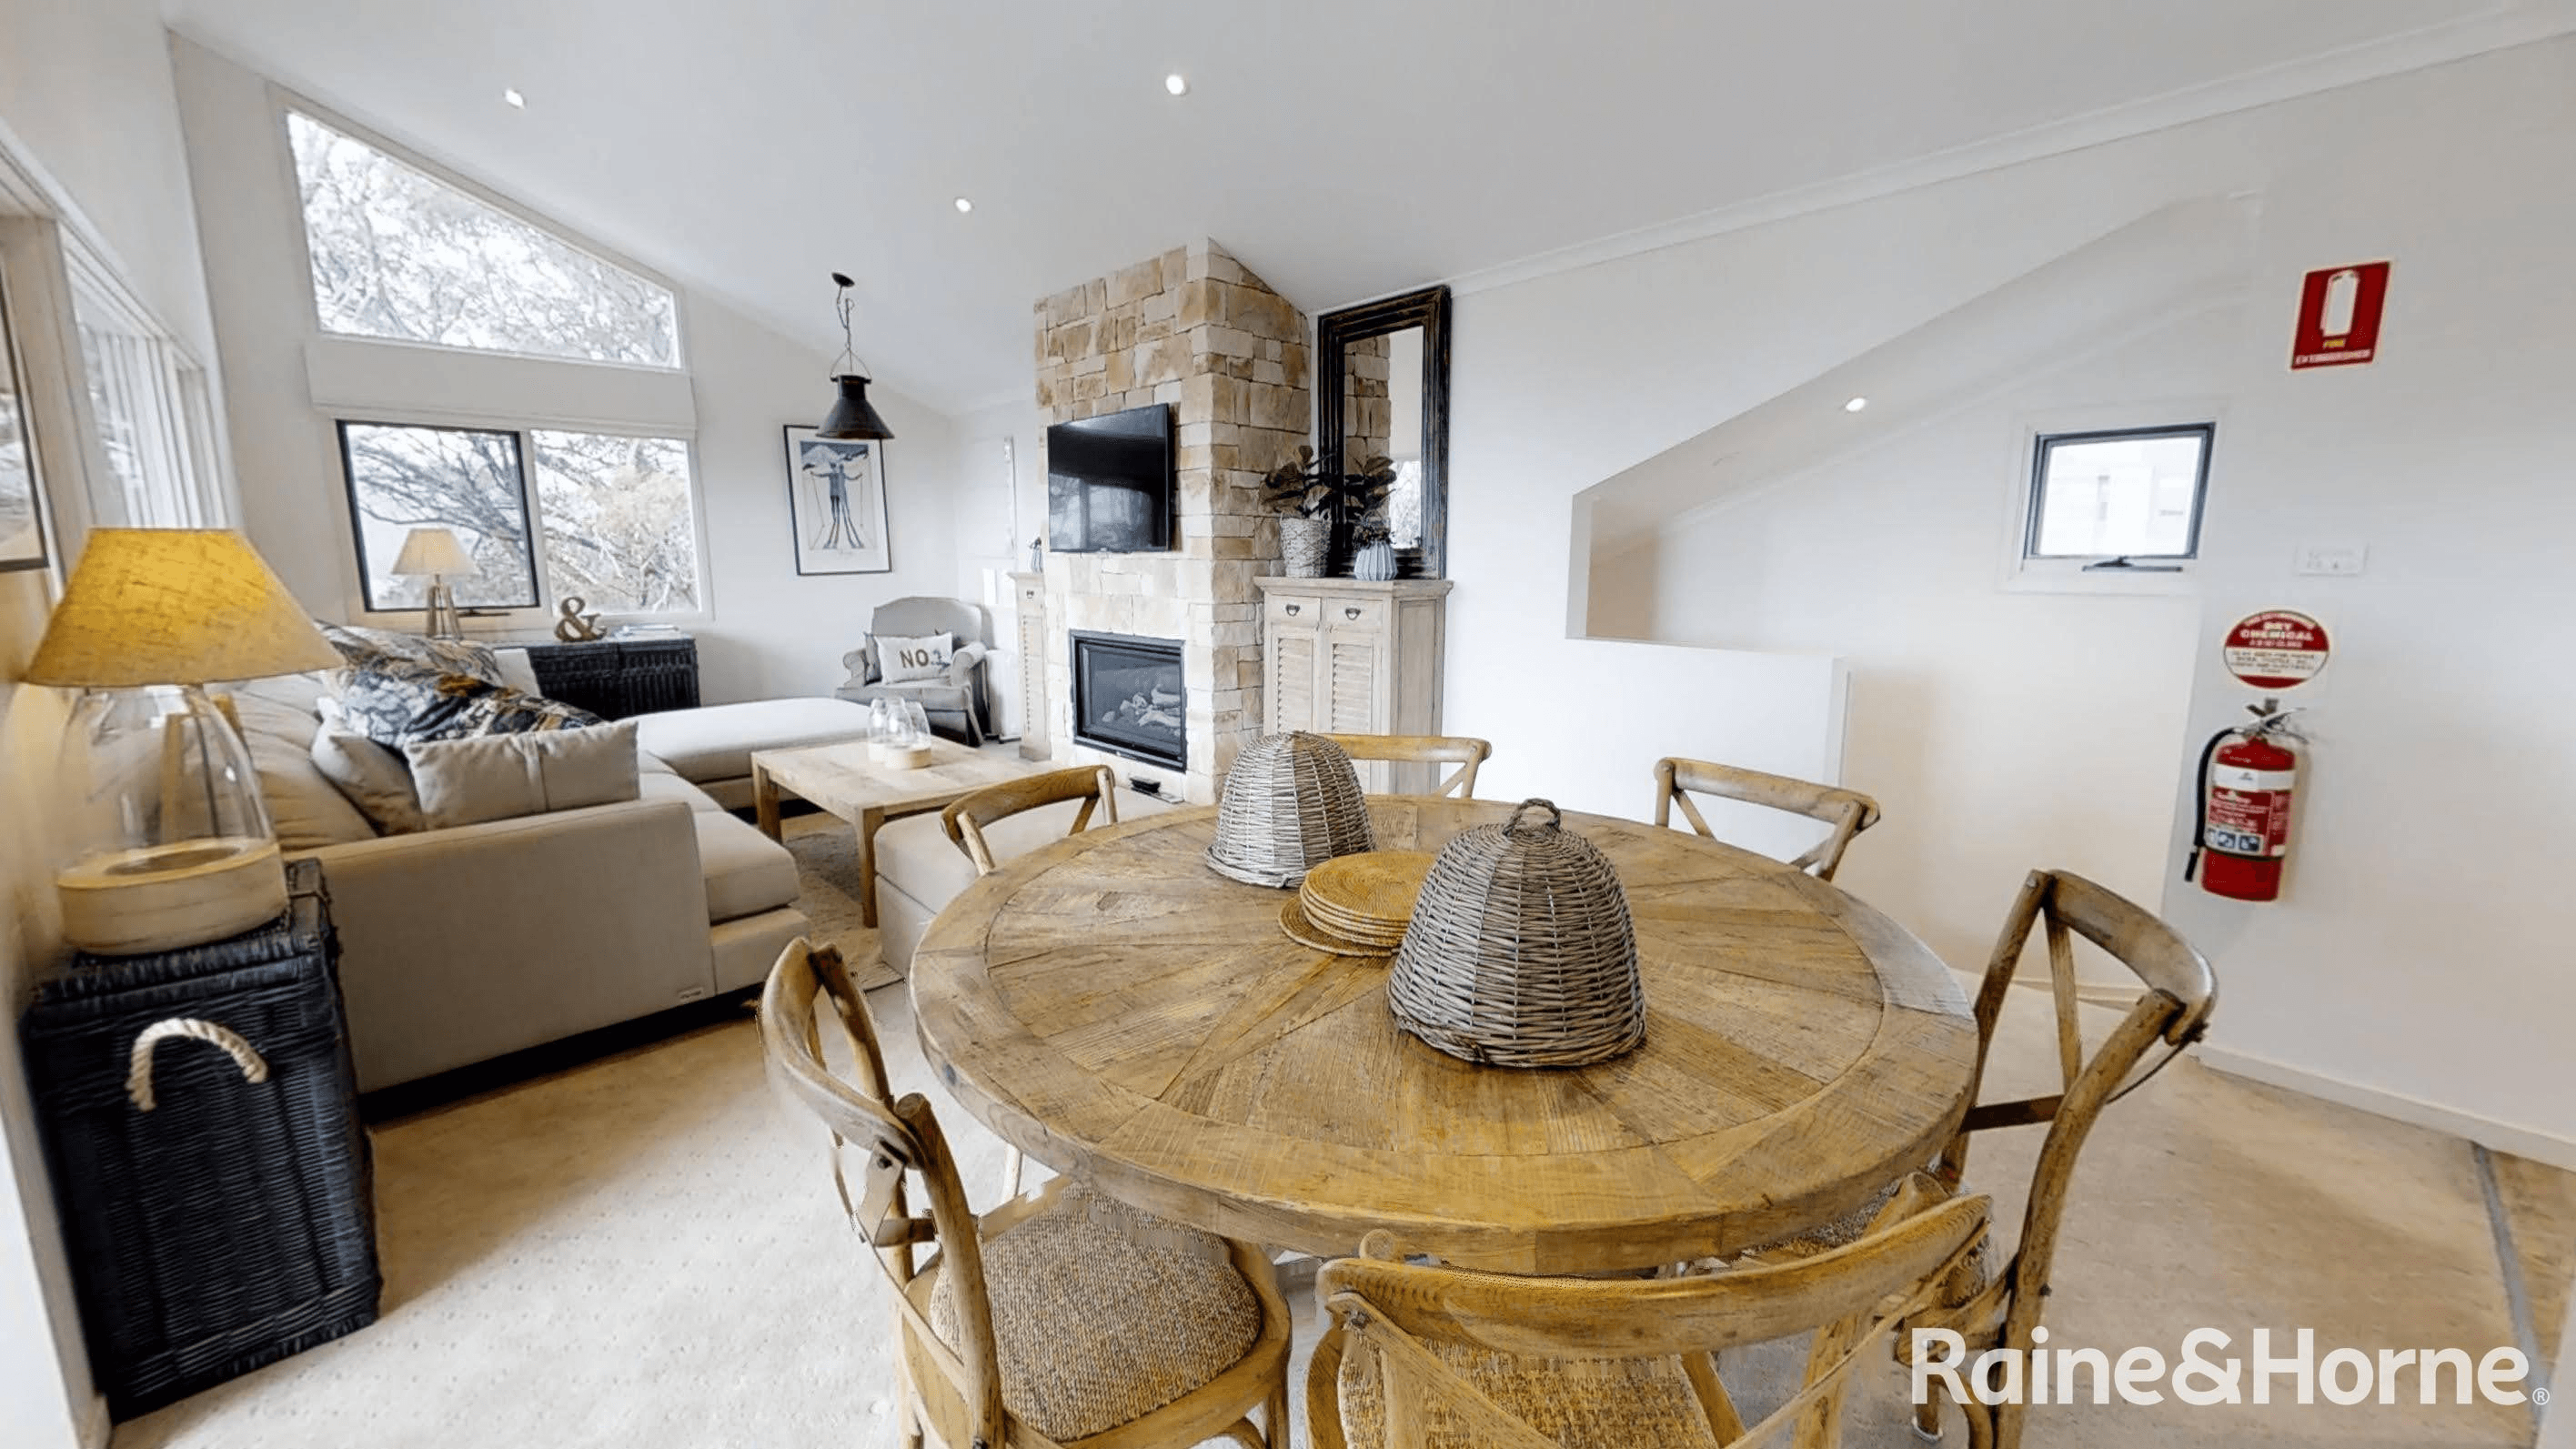 27/20 Candle Heath Road, PERISHER VALLEY, NSW 2624